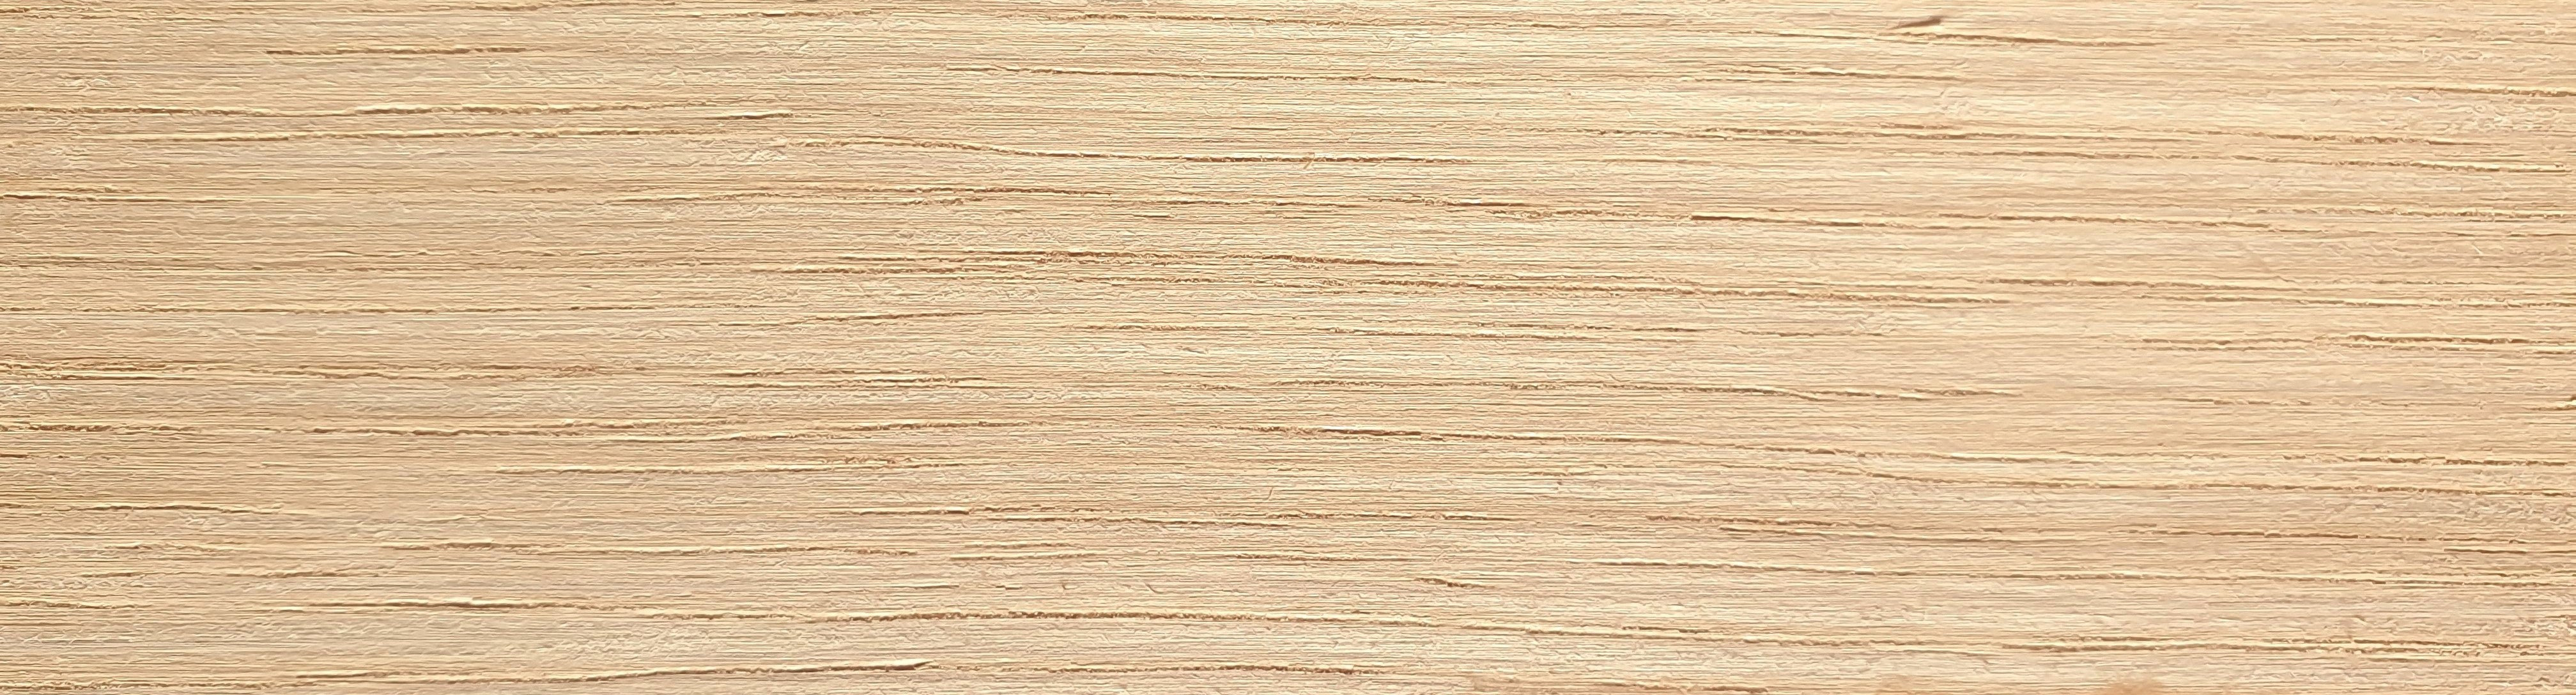 American White Oak Thickwood Unglued Edging / Lipping 30mm x 1mm Thick Oak Wood Edging